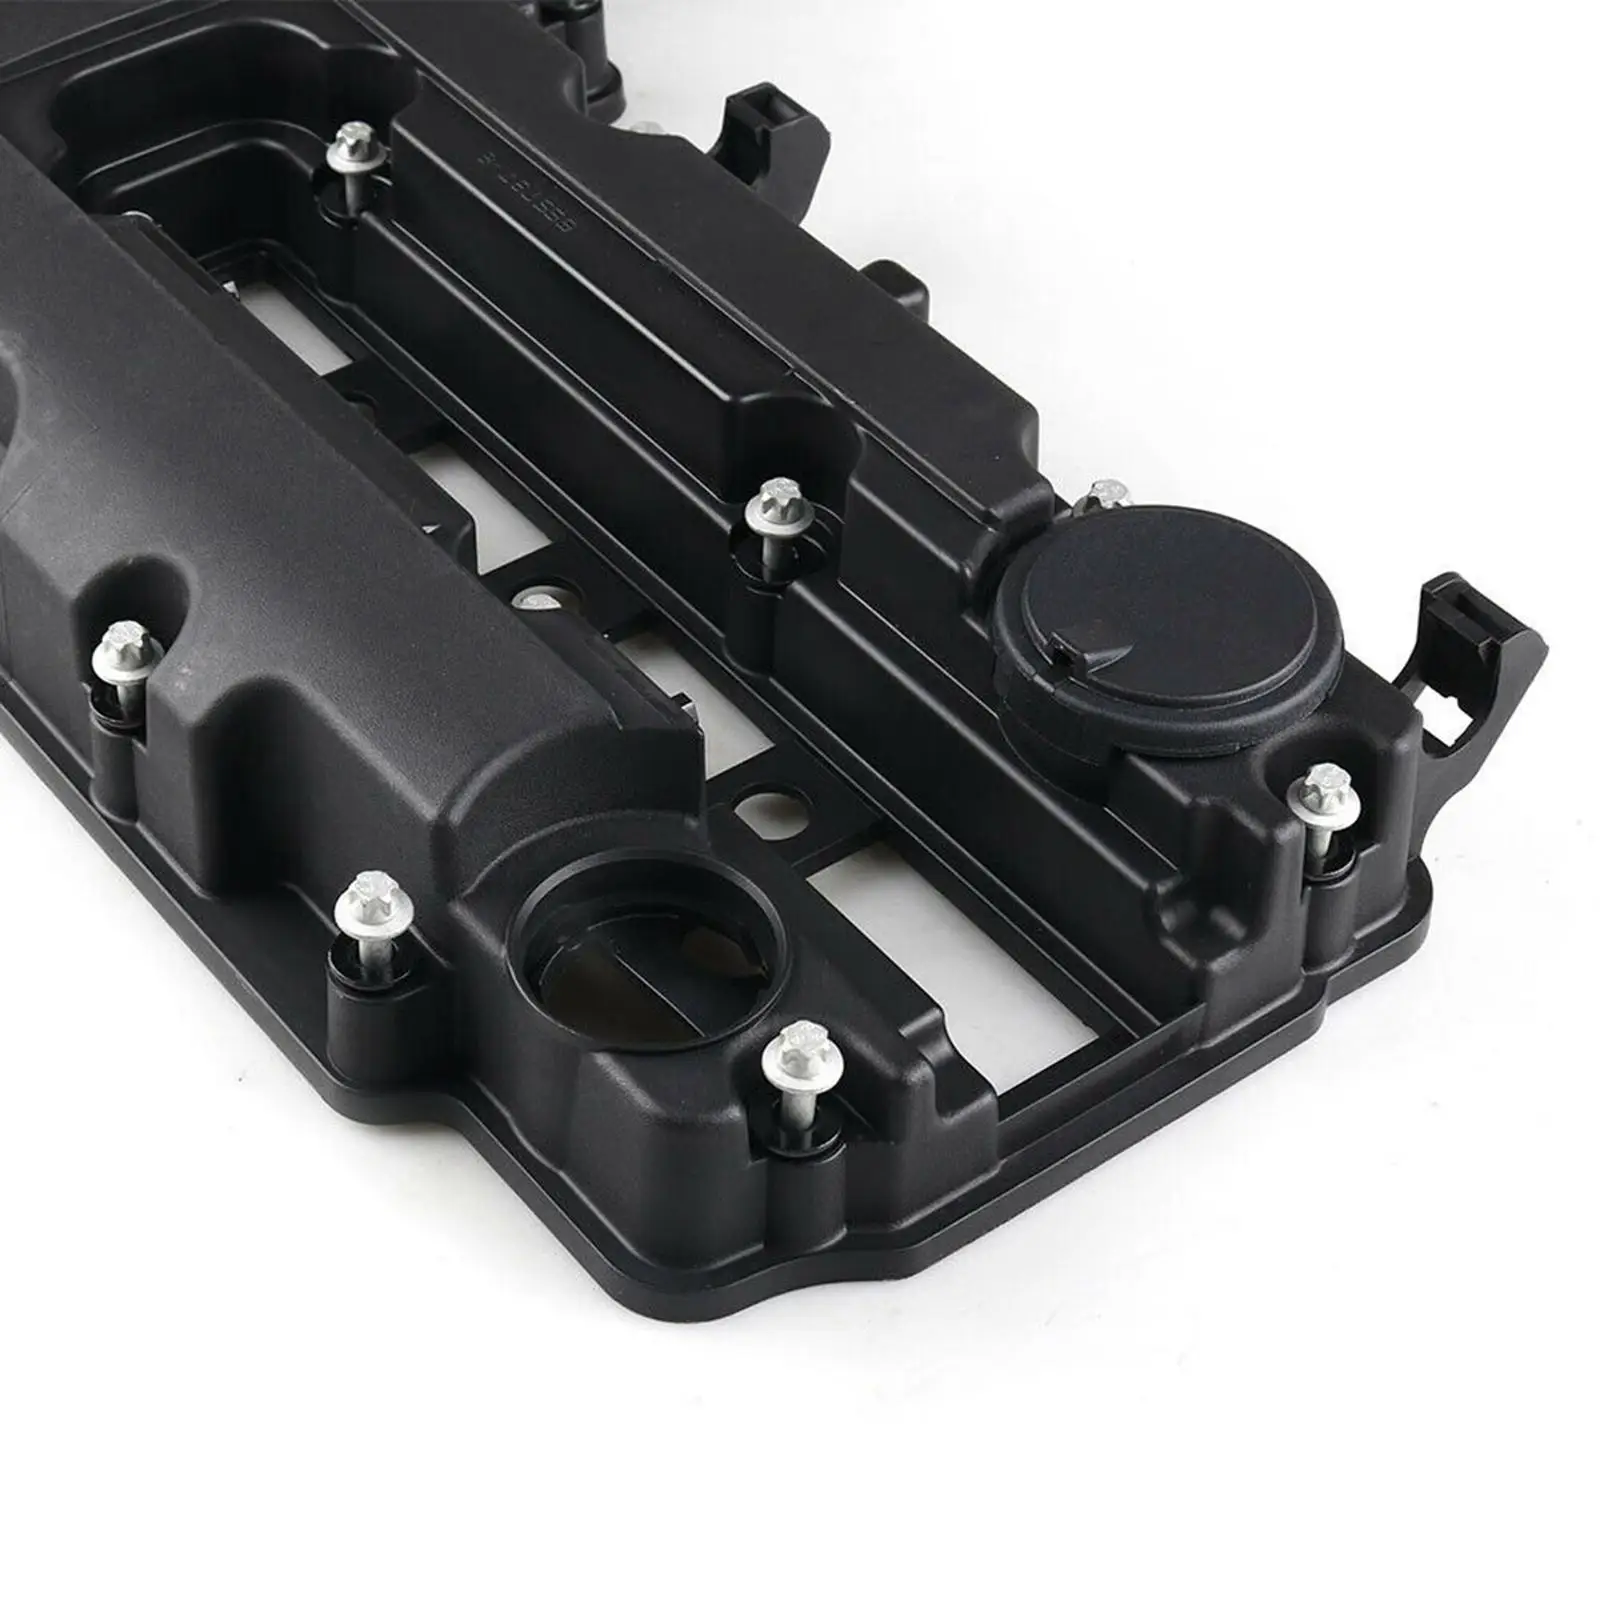 Camshaft Engine Valve Cover W/ 73746 25198874 2519849 for     Replace Accessory